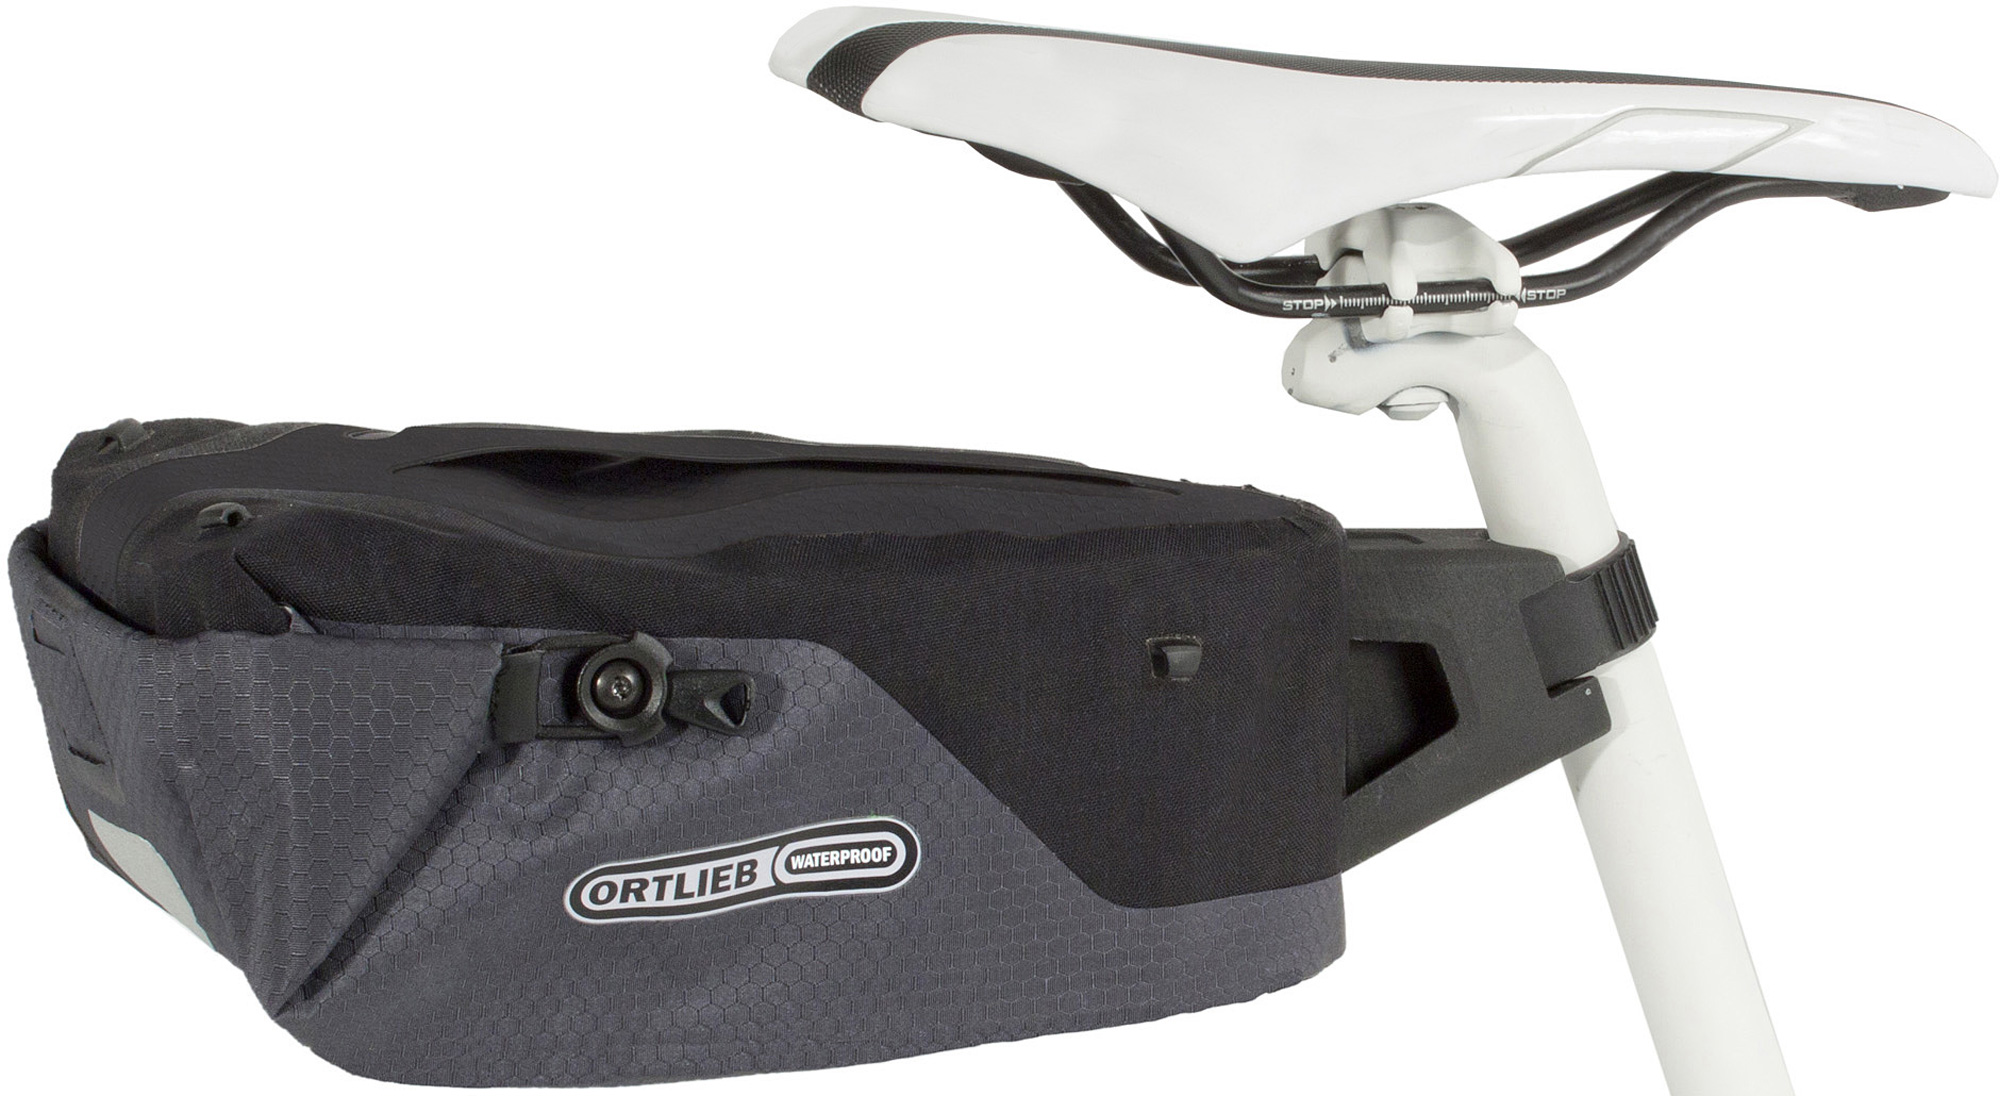 seatpost bags for bicycles